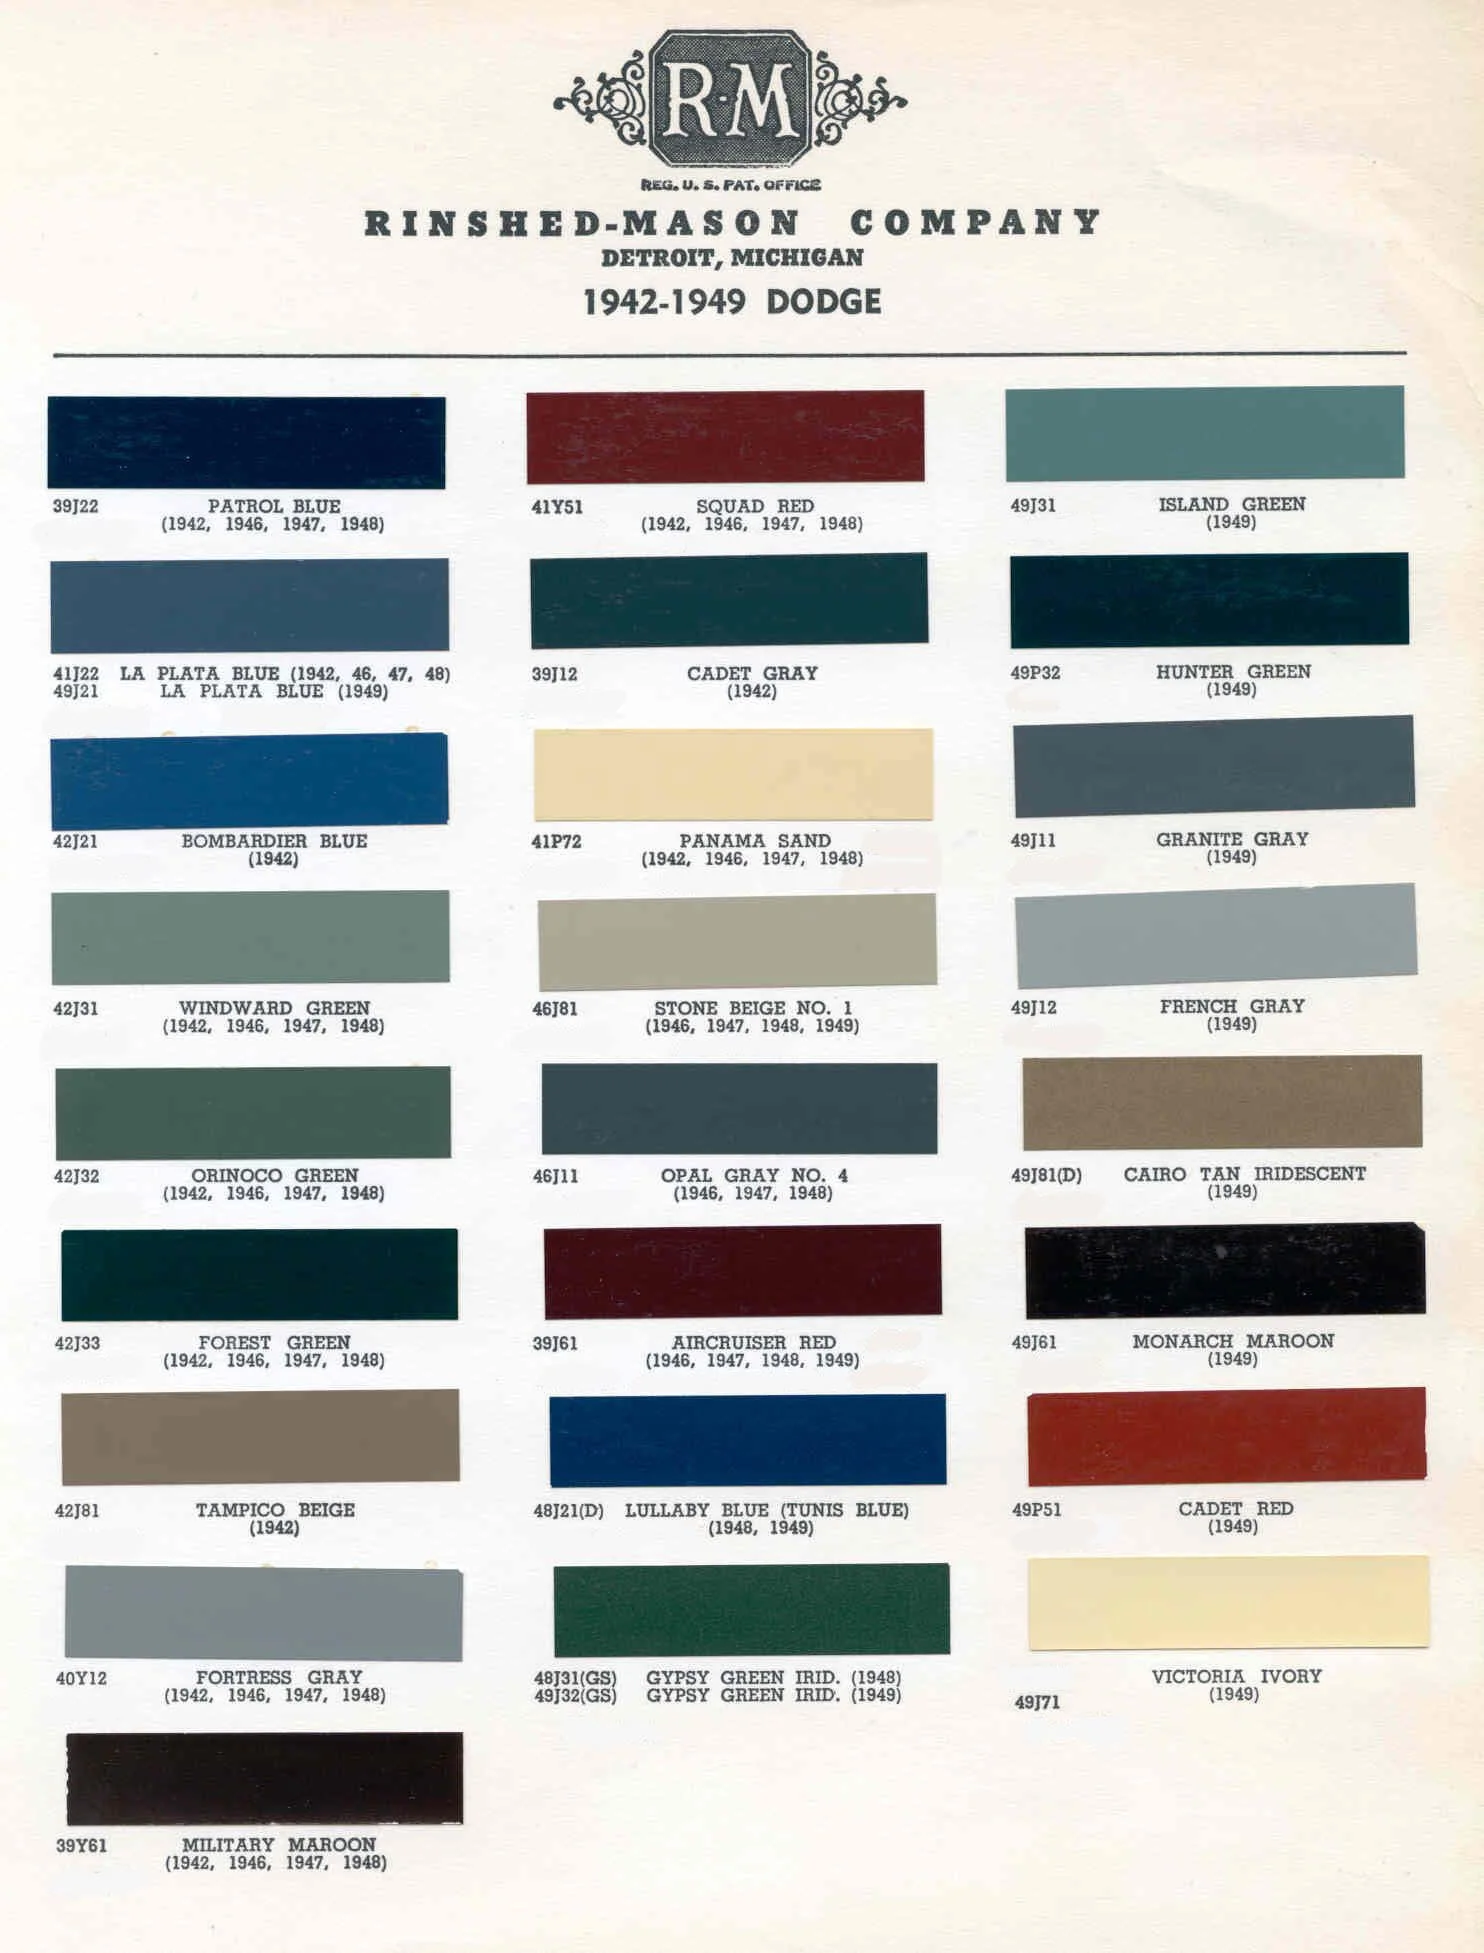 Summary Of Colors used on all Dodge Vehicles in 1941-1949